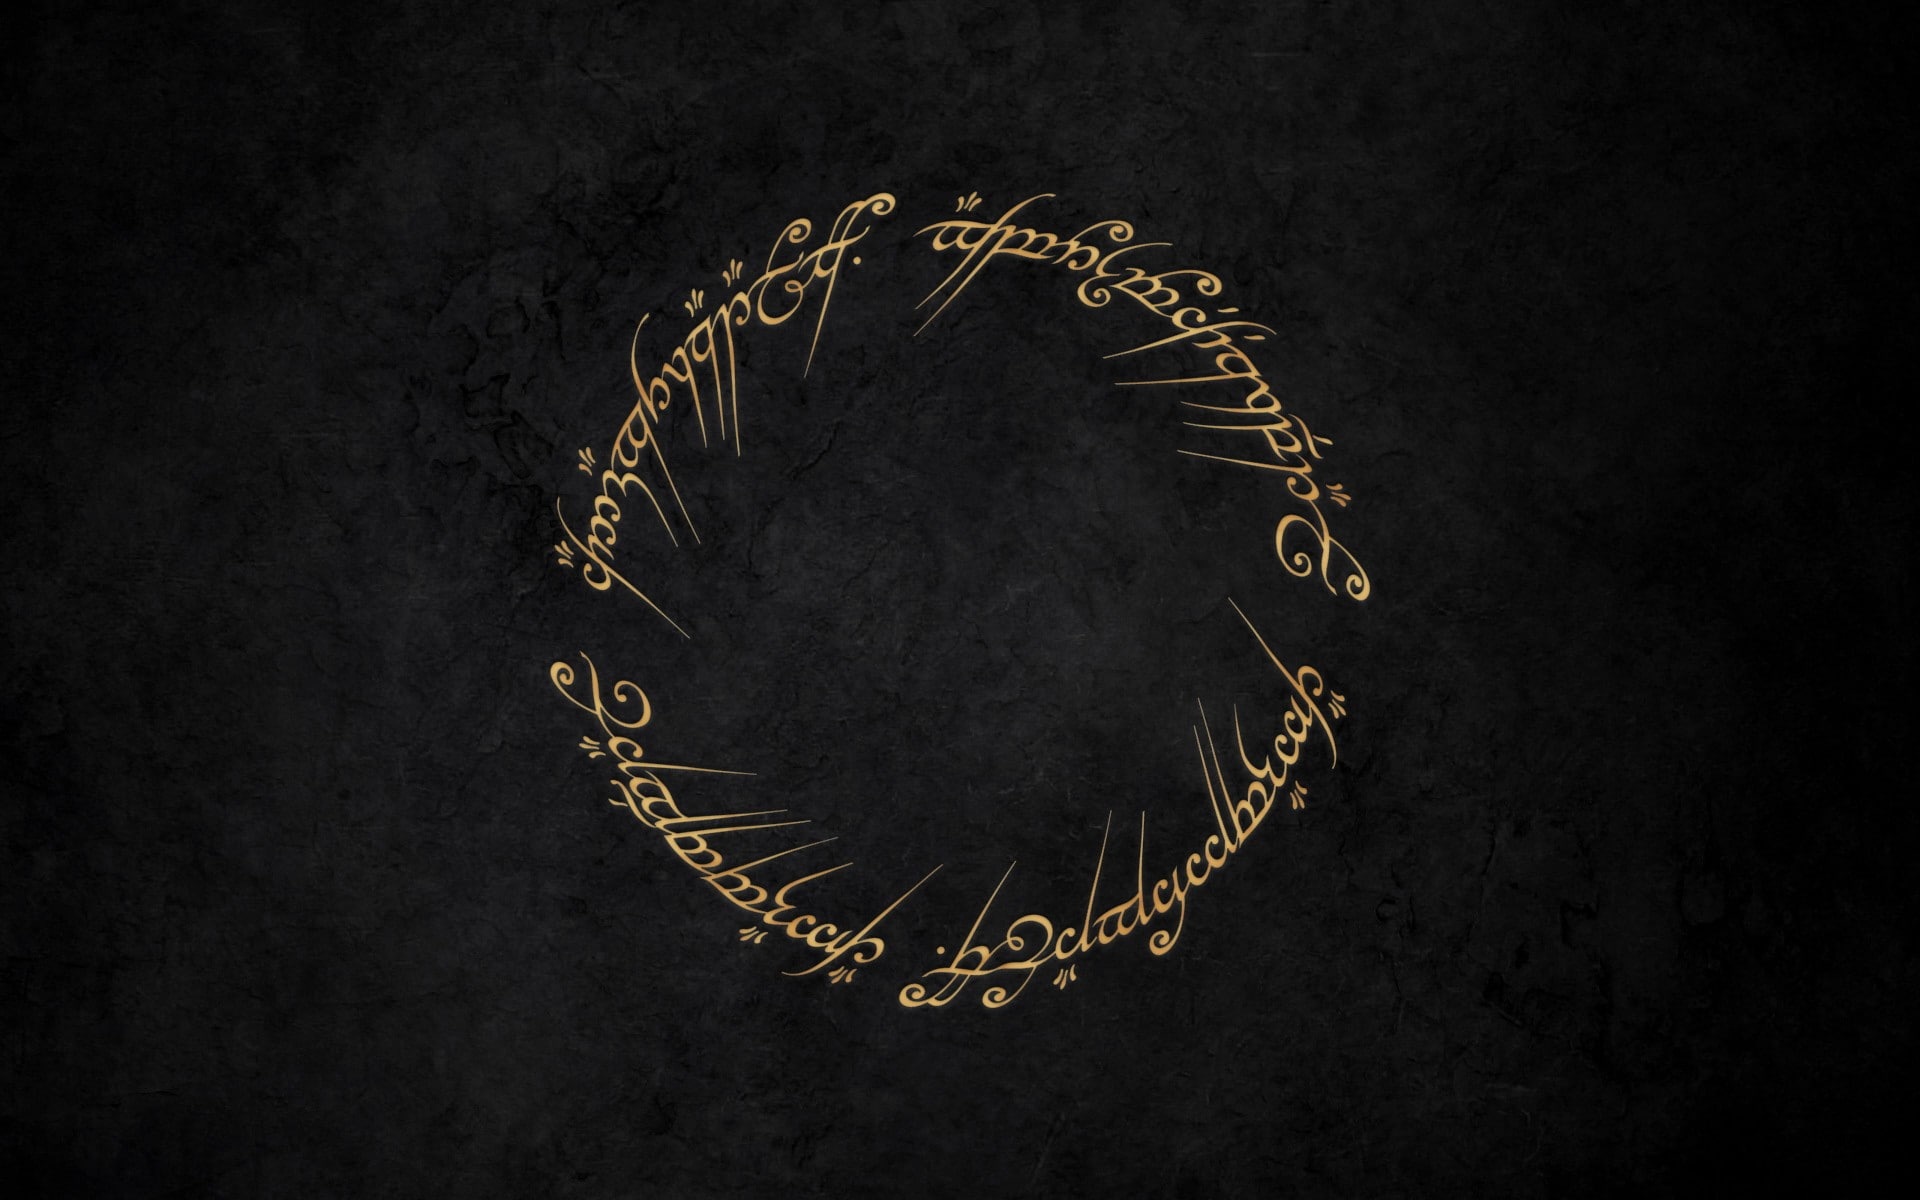 white texts on black background, The Lord of the Rings, J. R. R. Tolkien